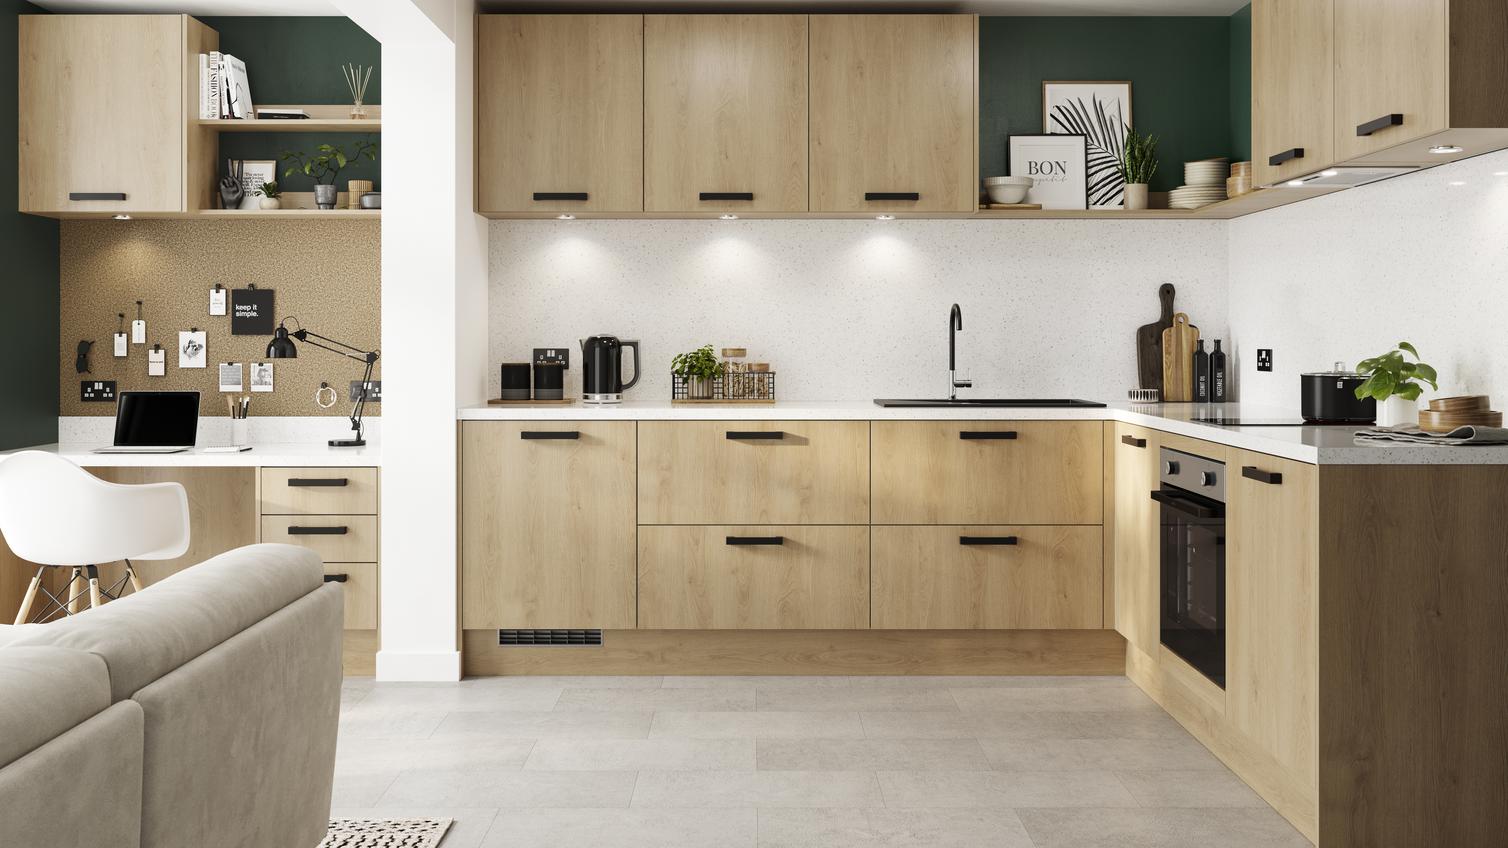 Natural oak l-shape kitchen with white kitchen worktops, black handles, and downlights. Includes an adjoining office space.